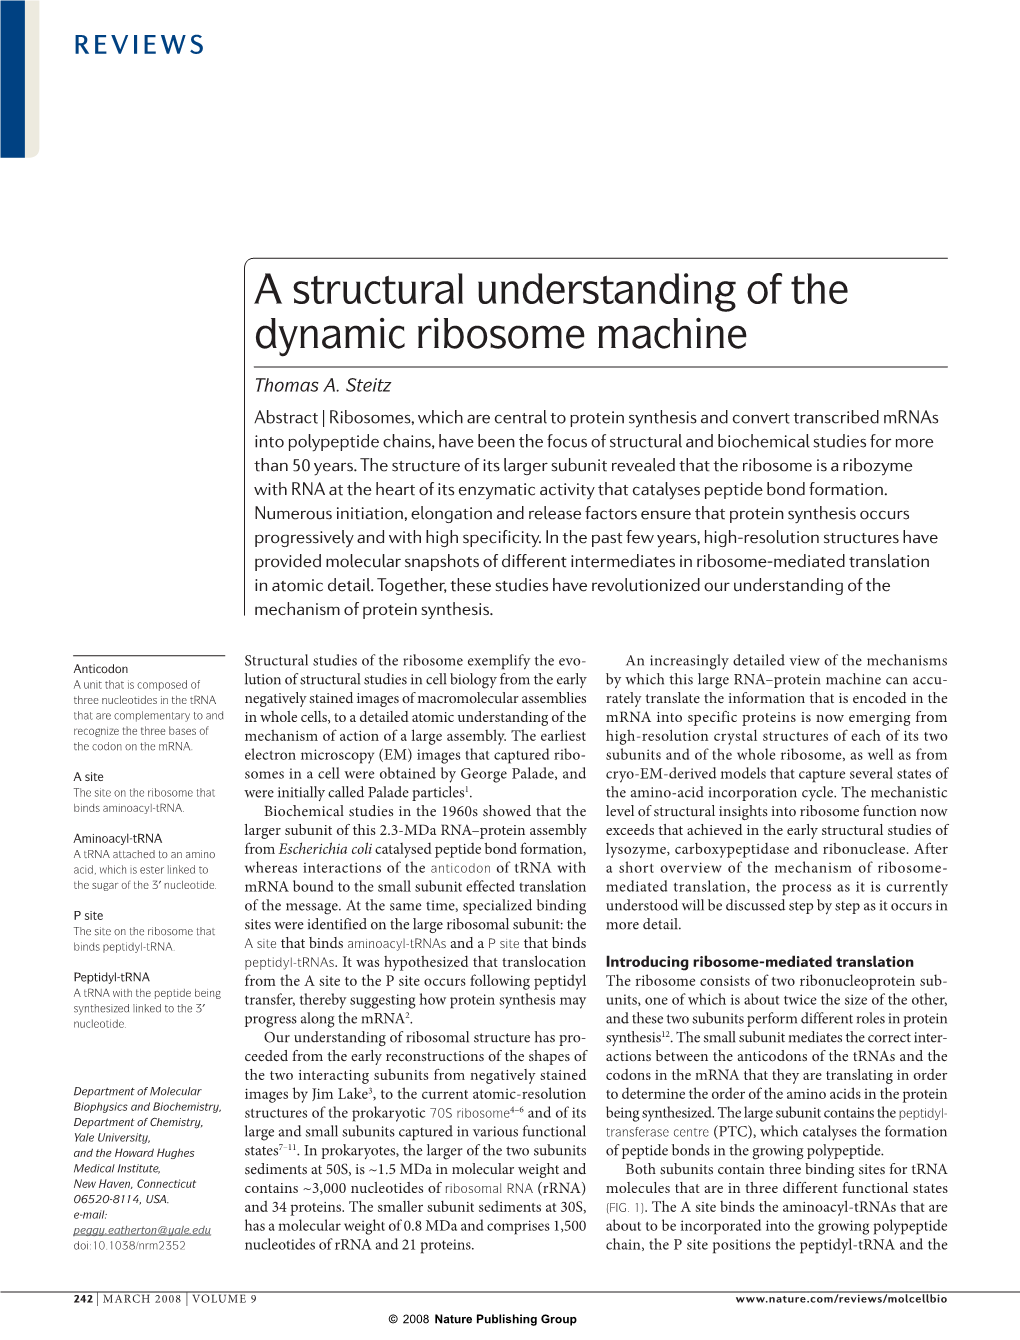 A Structural Understanding of the Dynamic Ribosome Machine